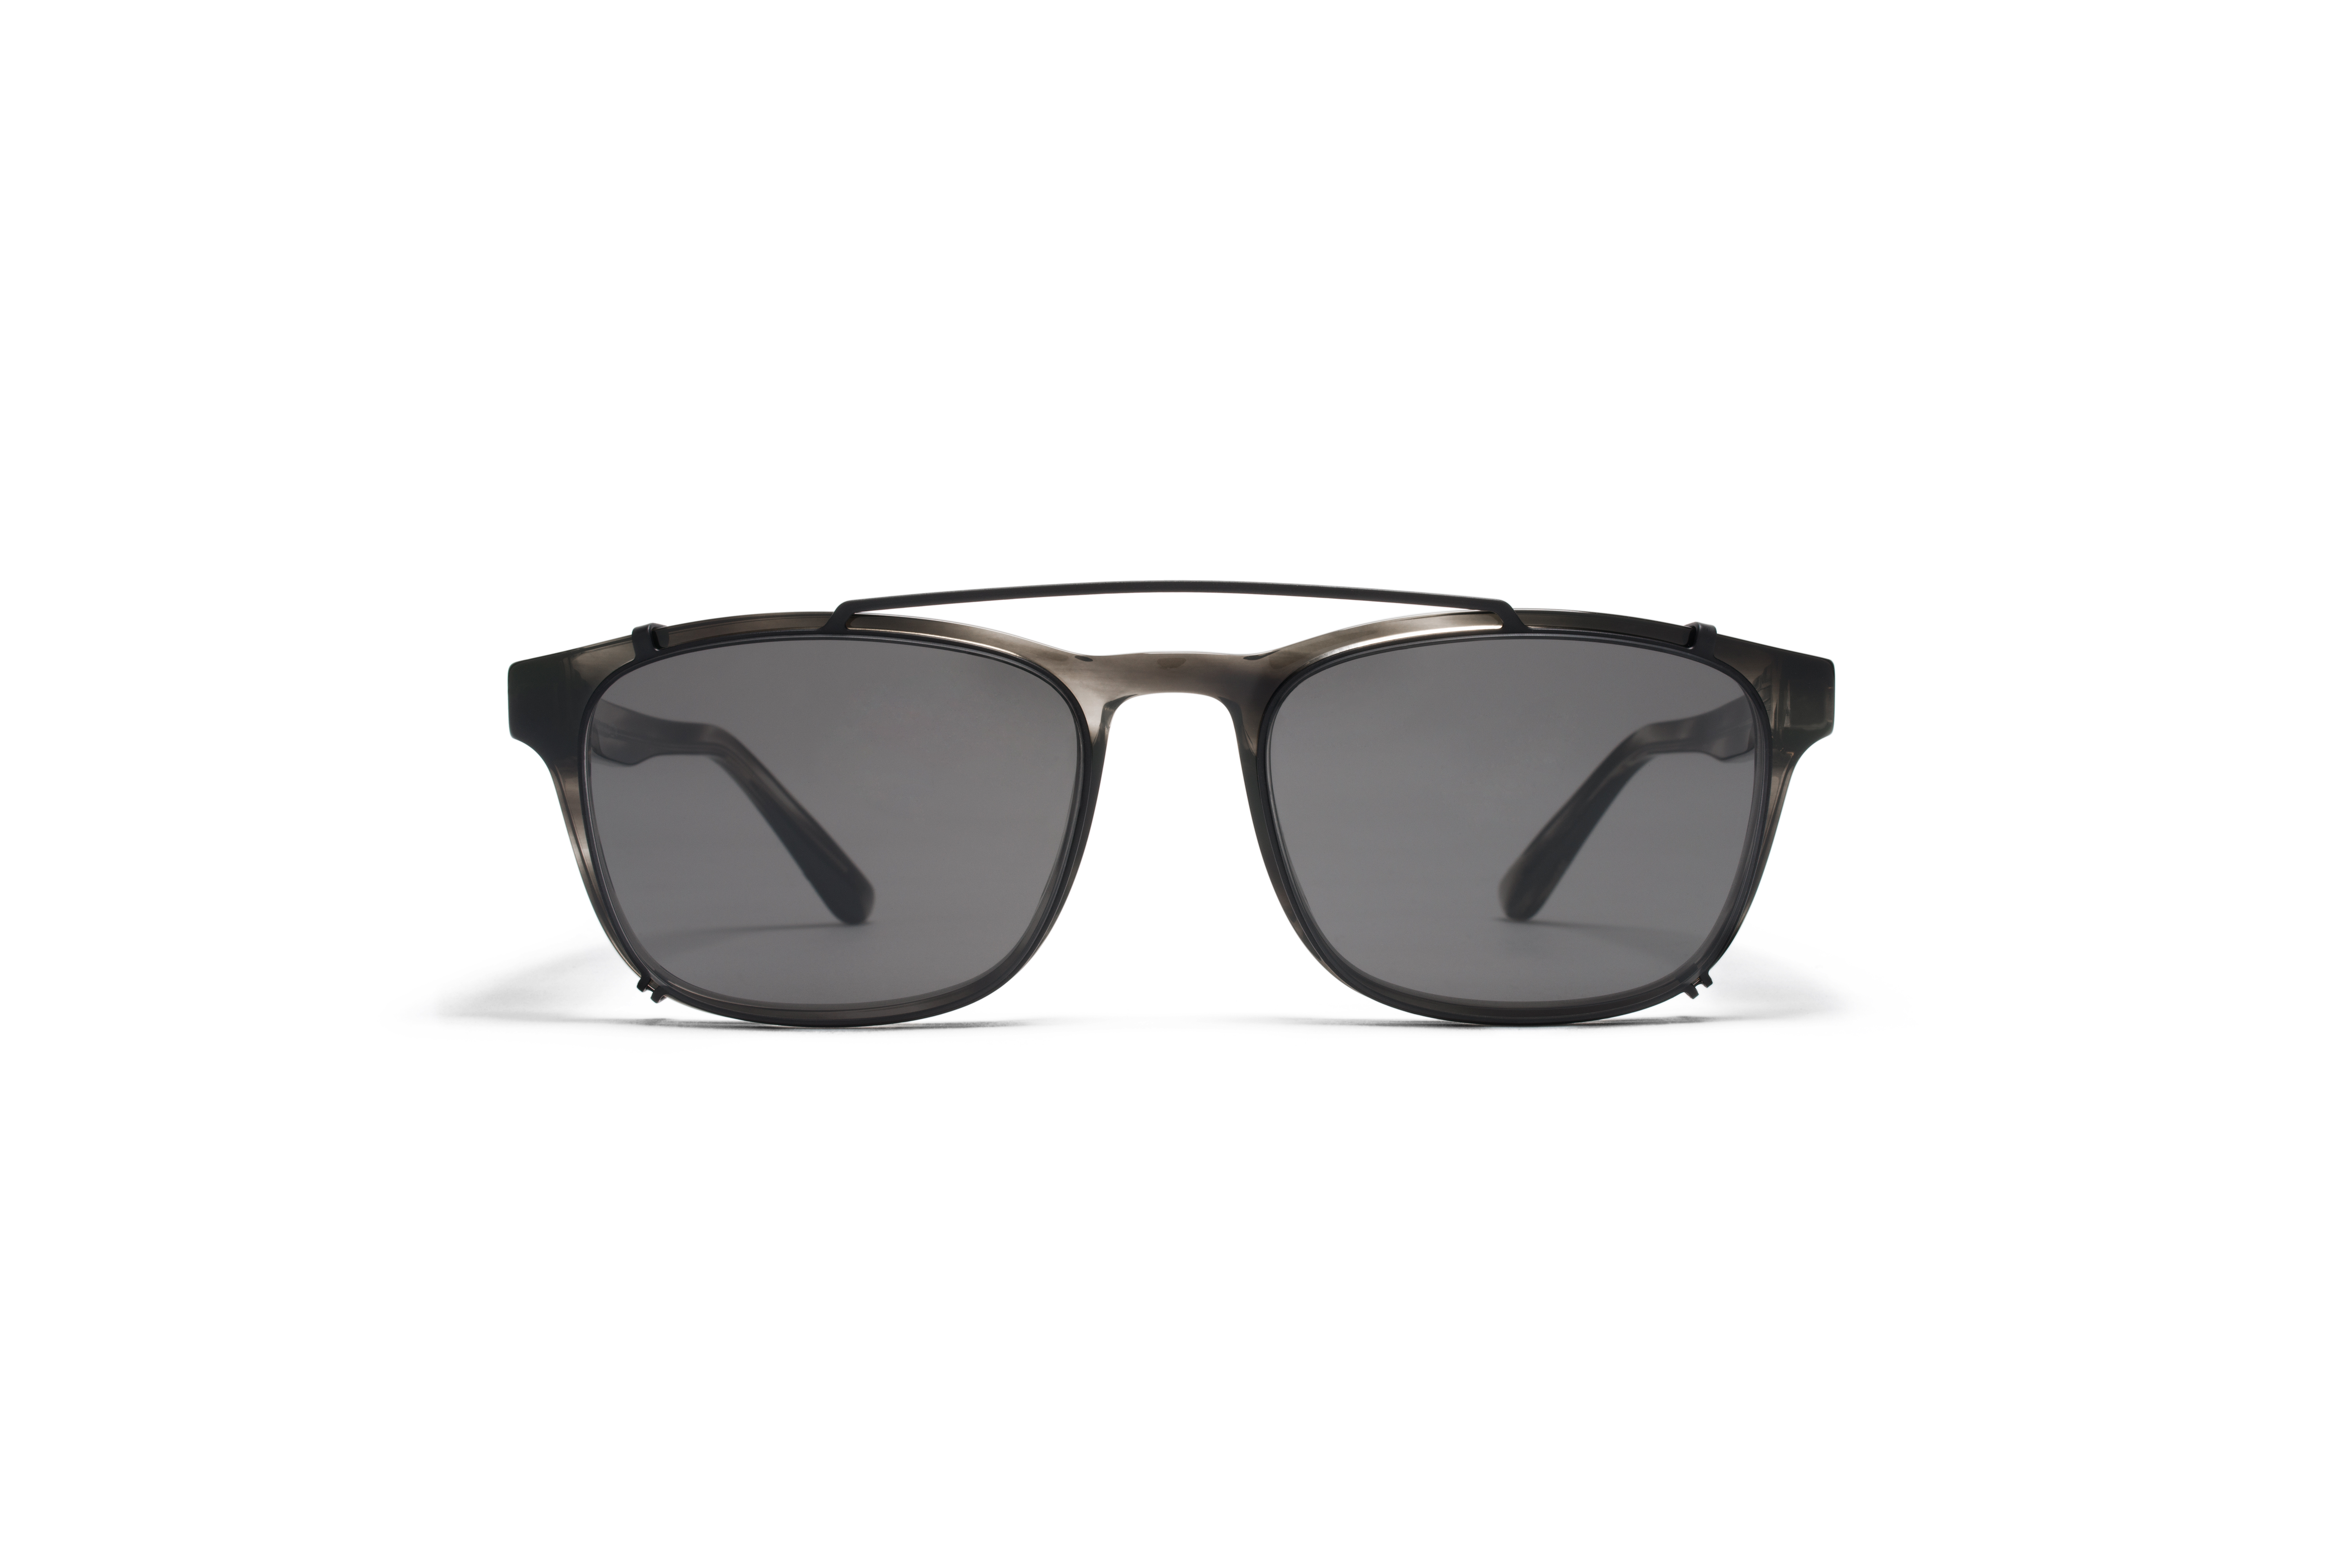 MYKITA - Unfortunately this product is no longer available